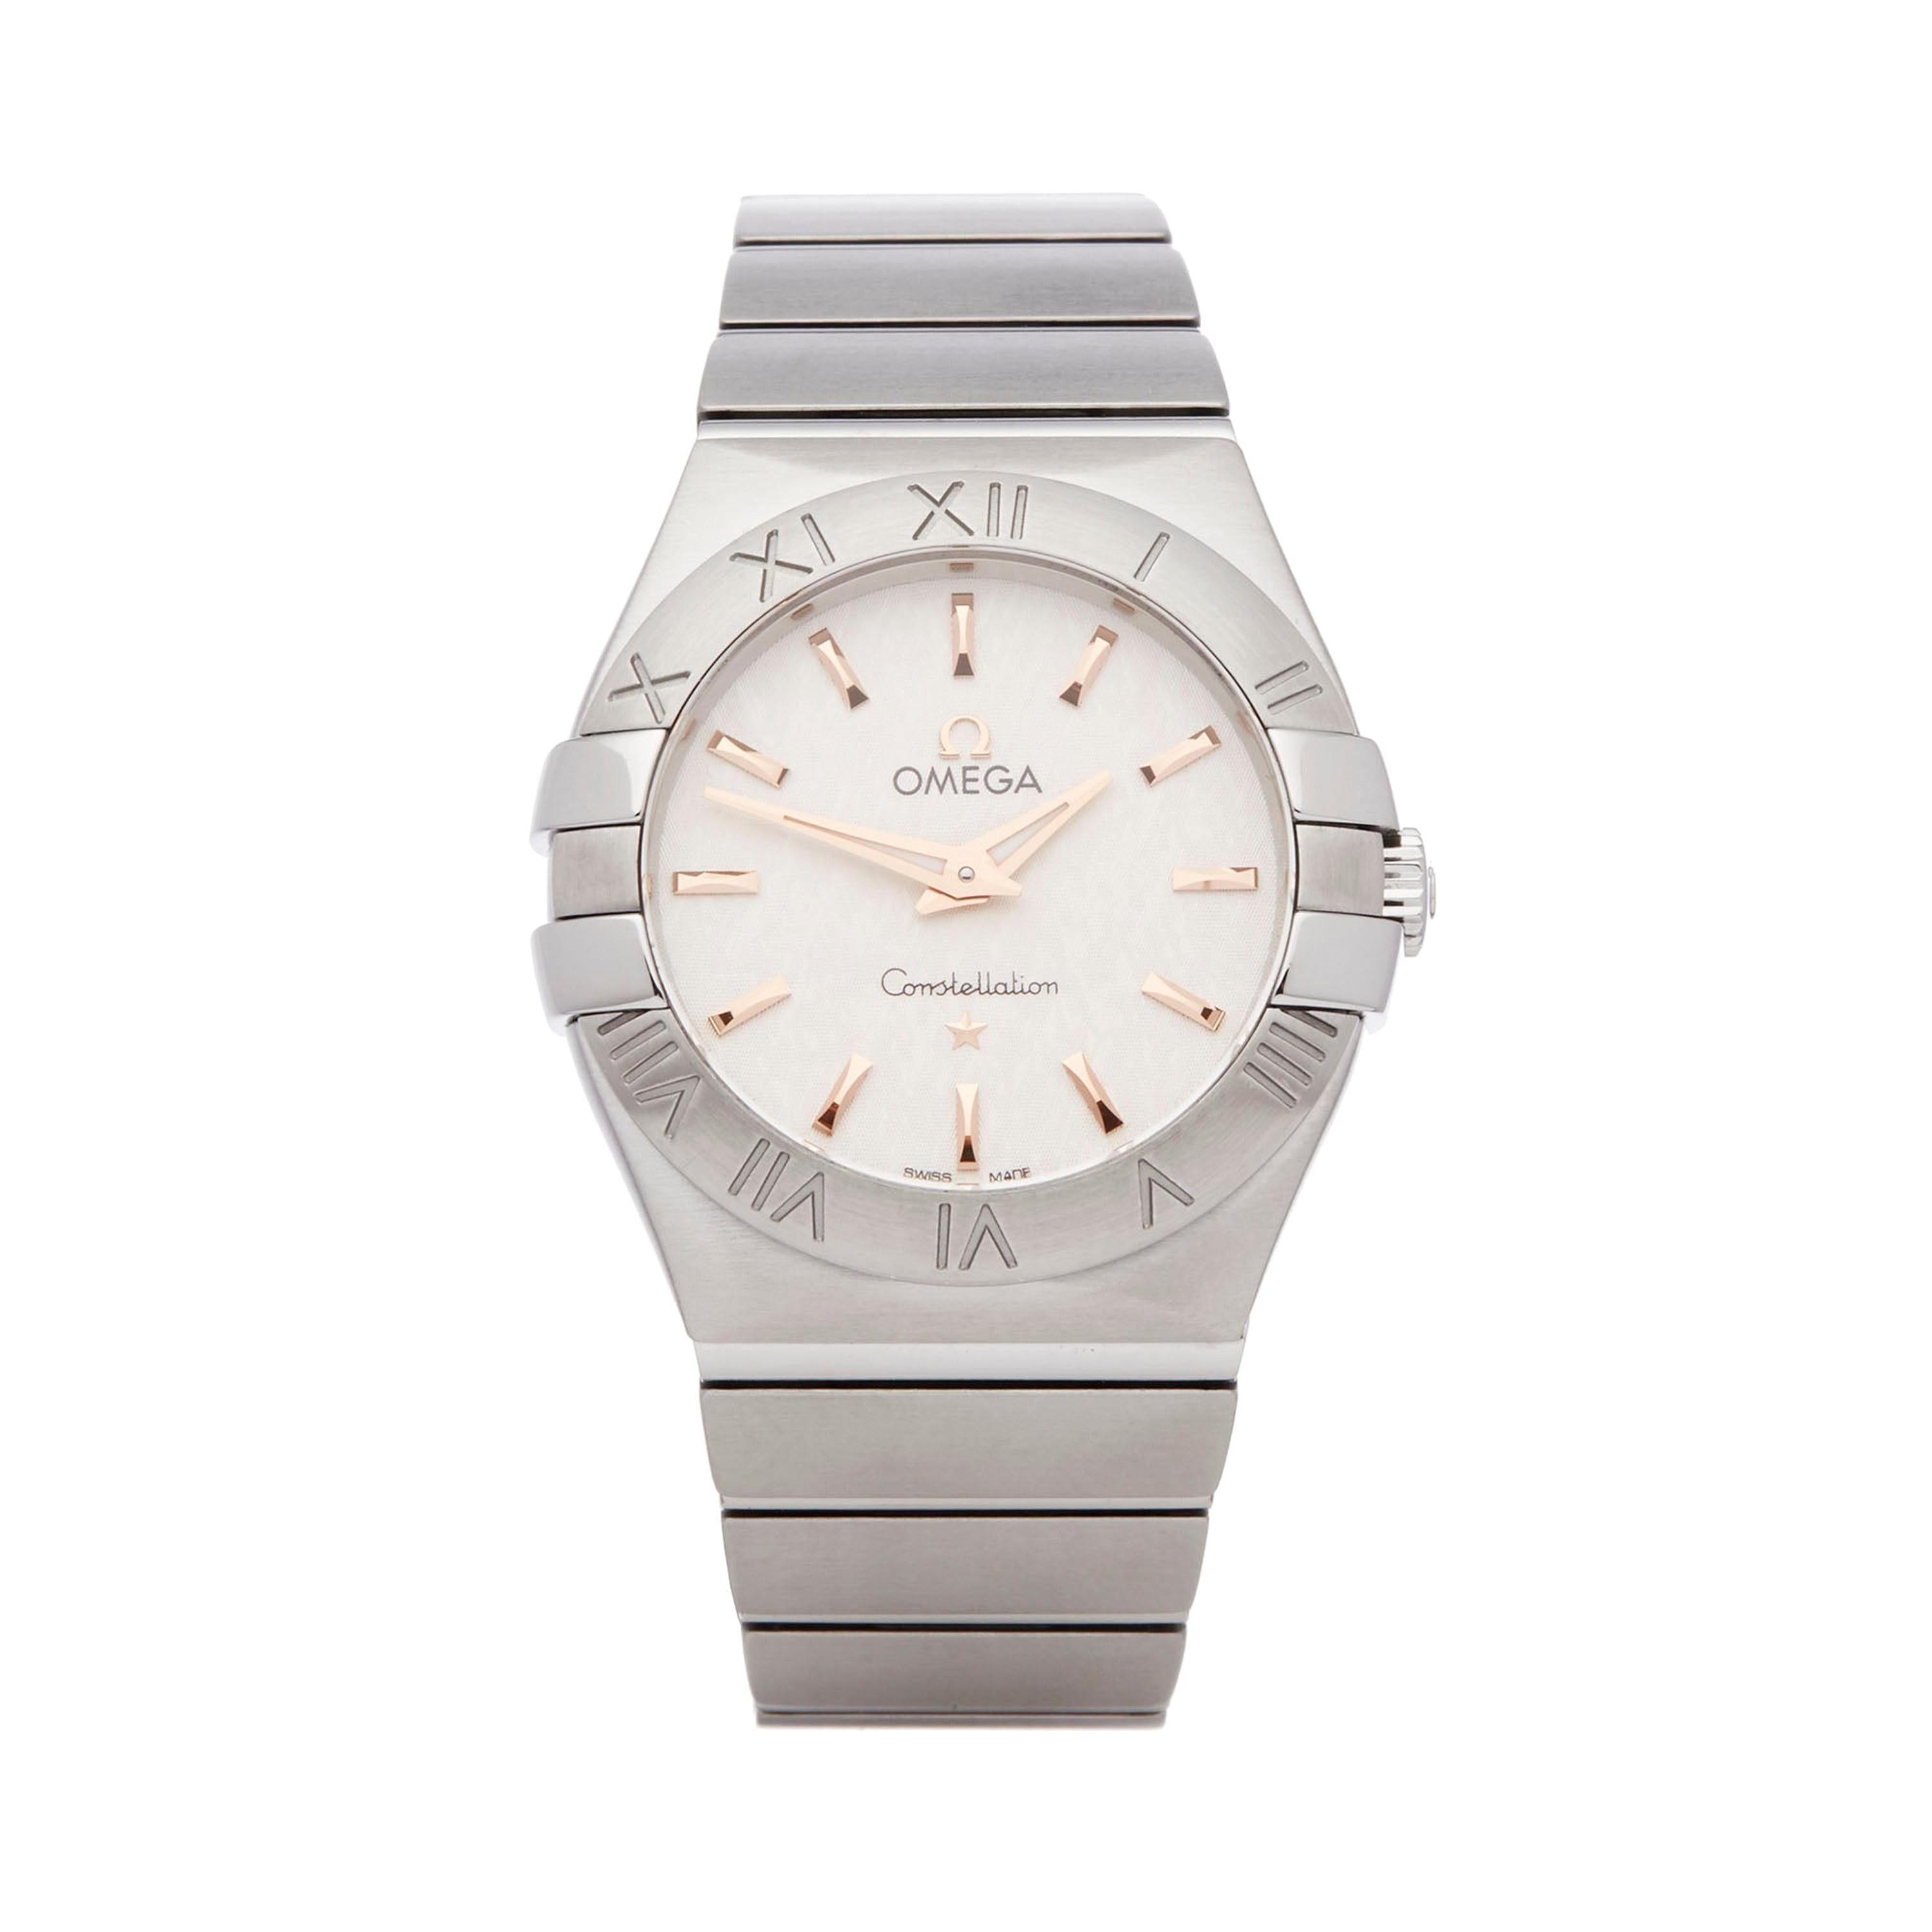 Omega Constellation Stainless Steel 12310276002004 Wristwatch